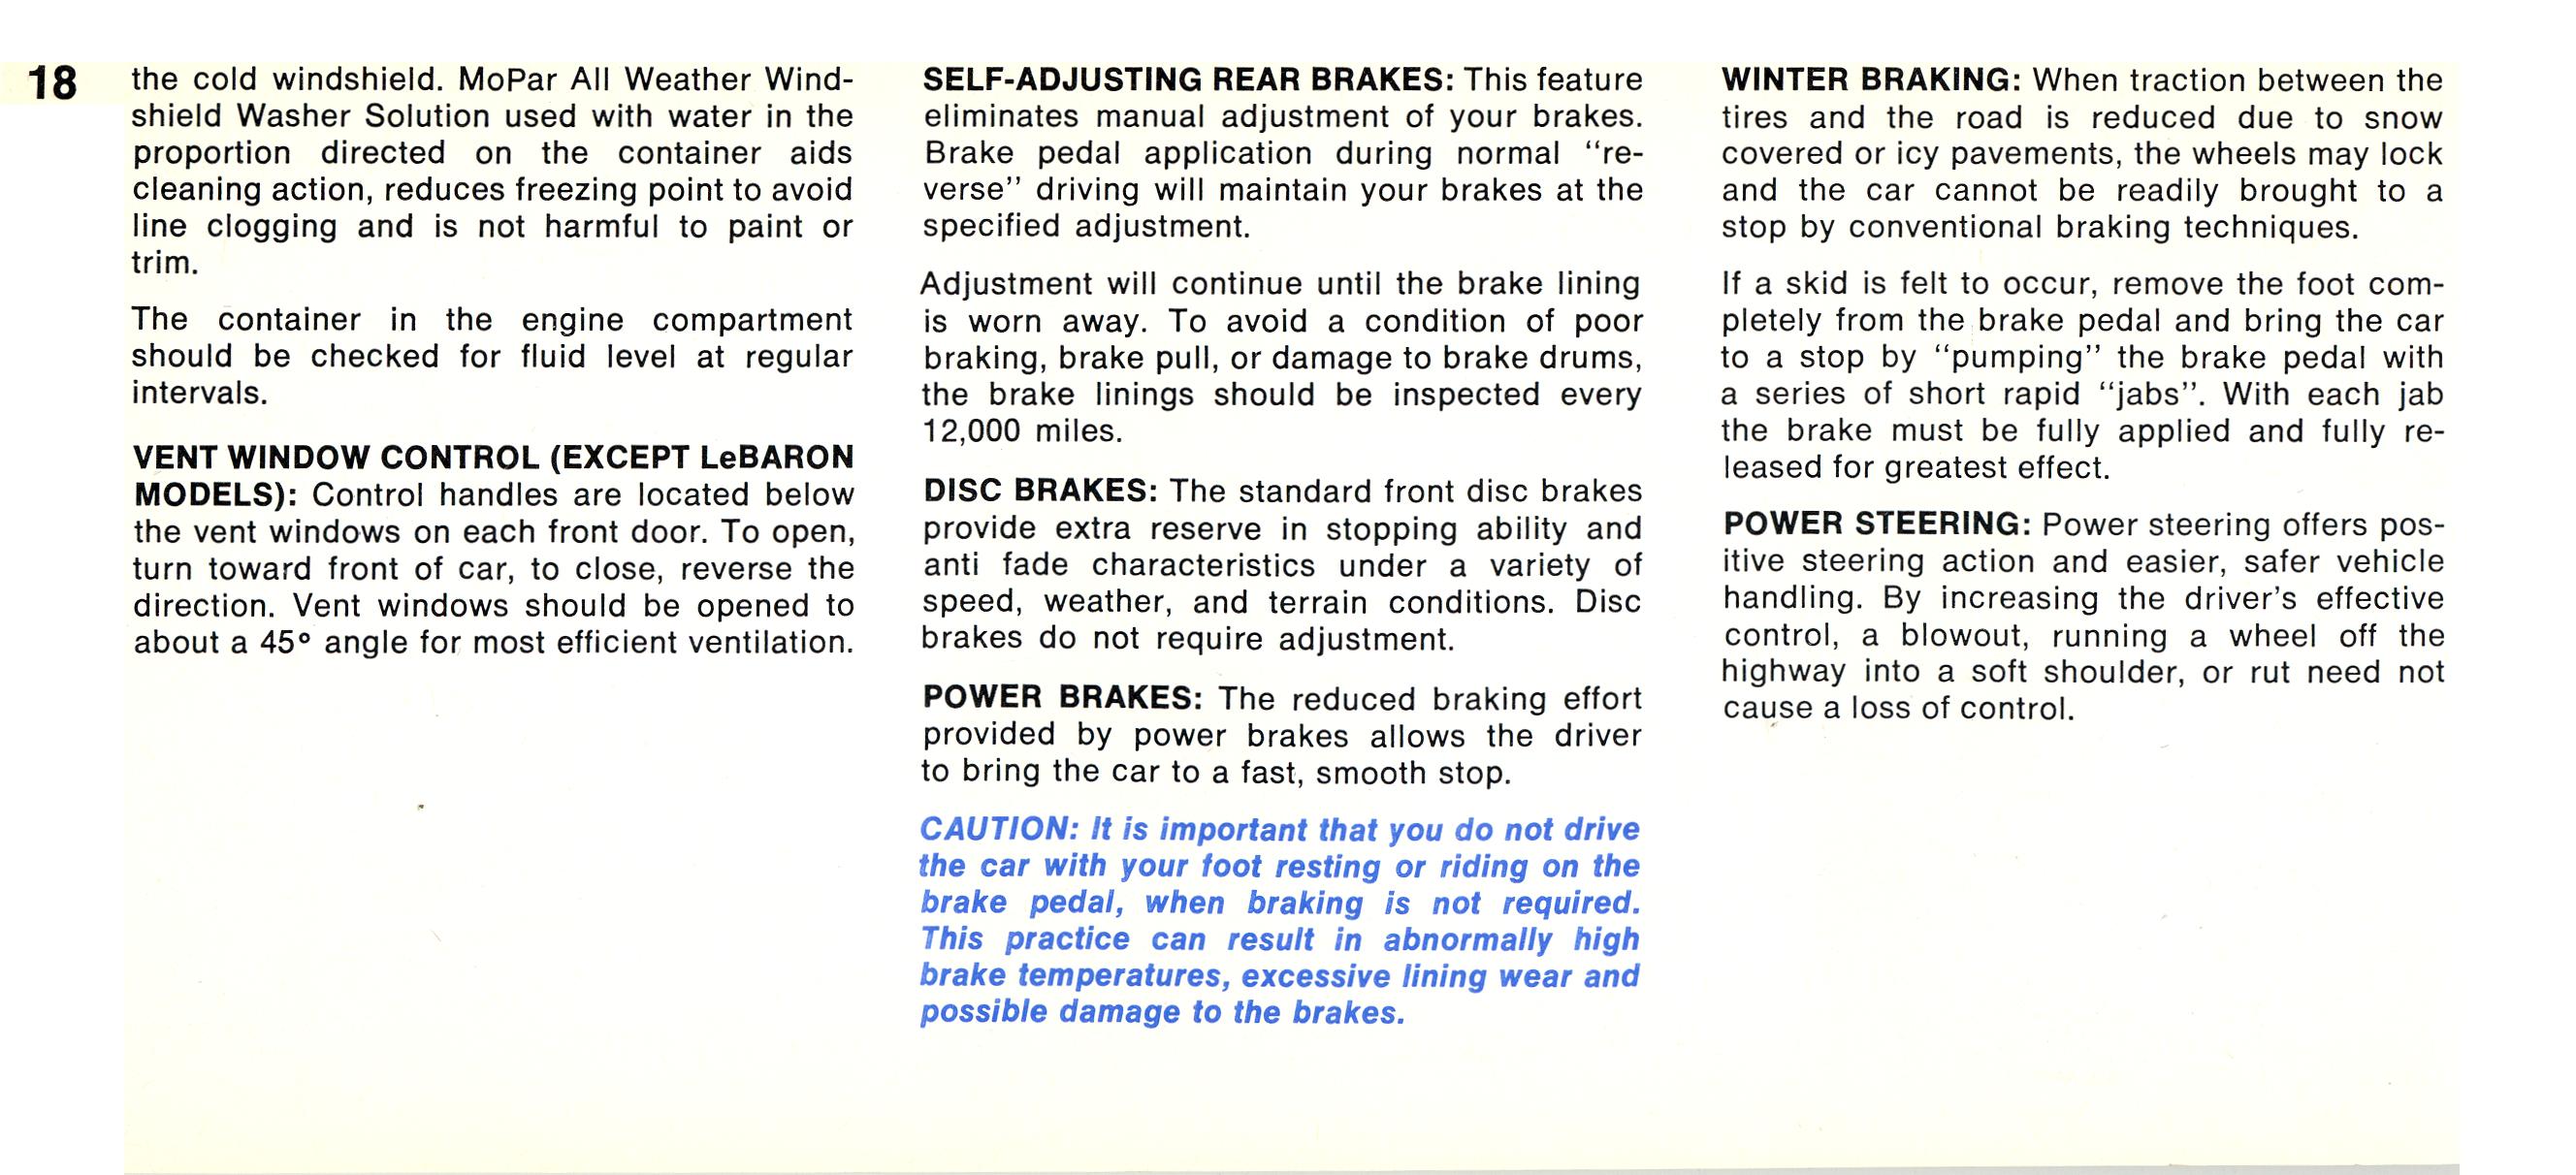 1968 Chrysler Imperial Owners Manual Page 11